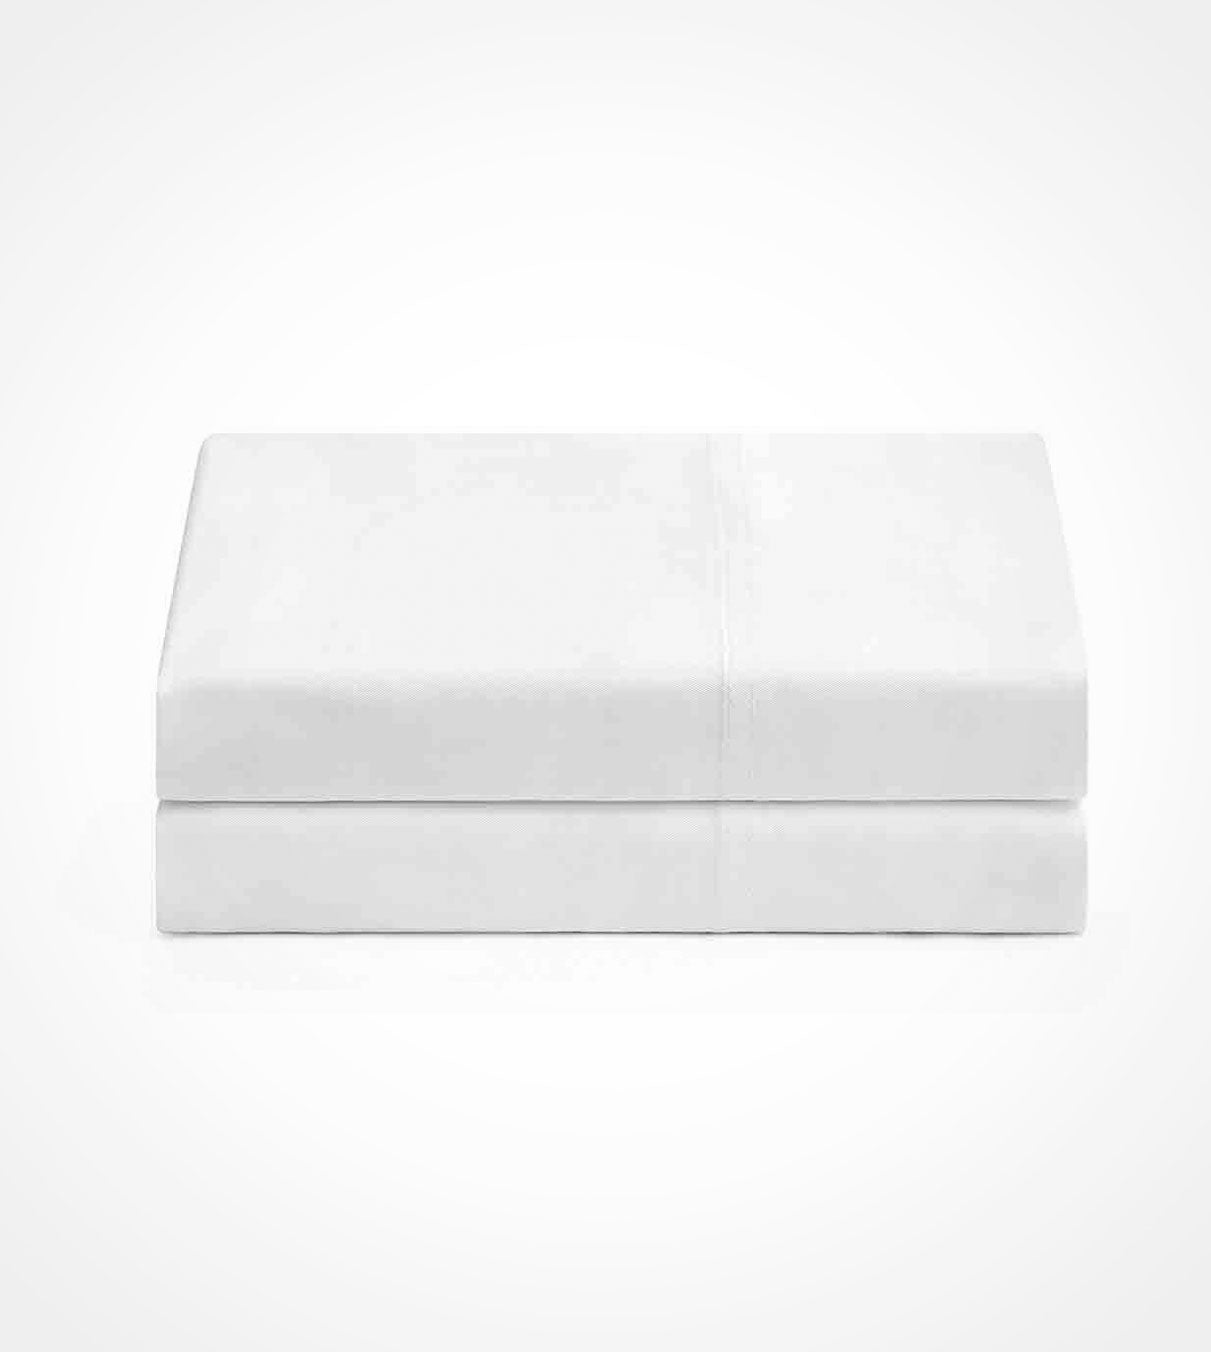 Product: Pillowcase Set | Color: Bamboo White